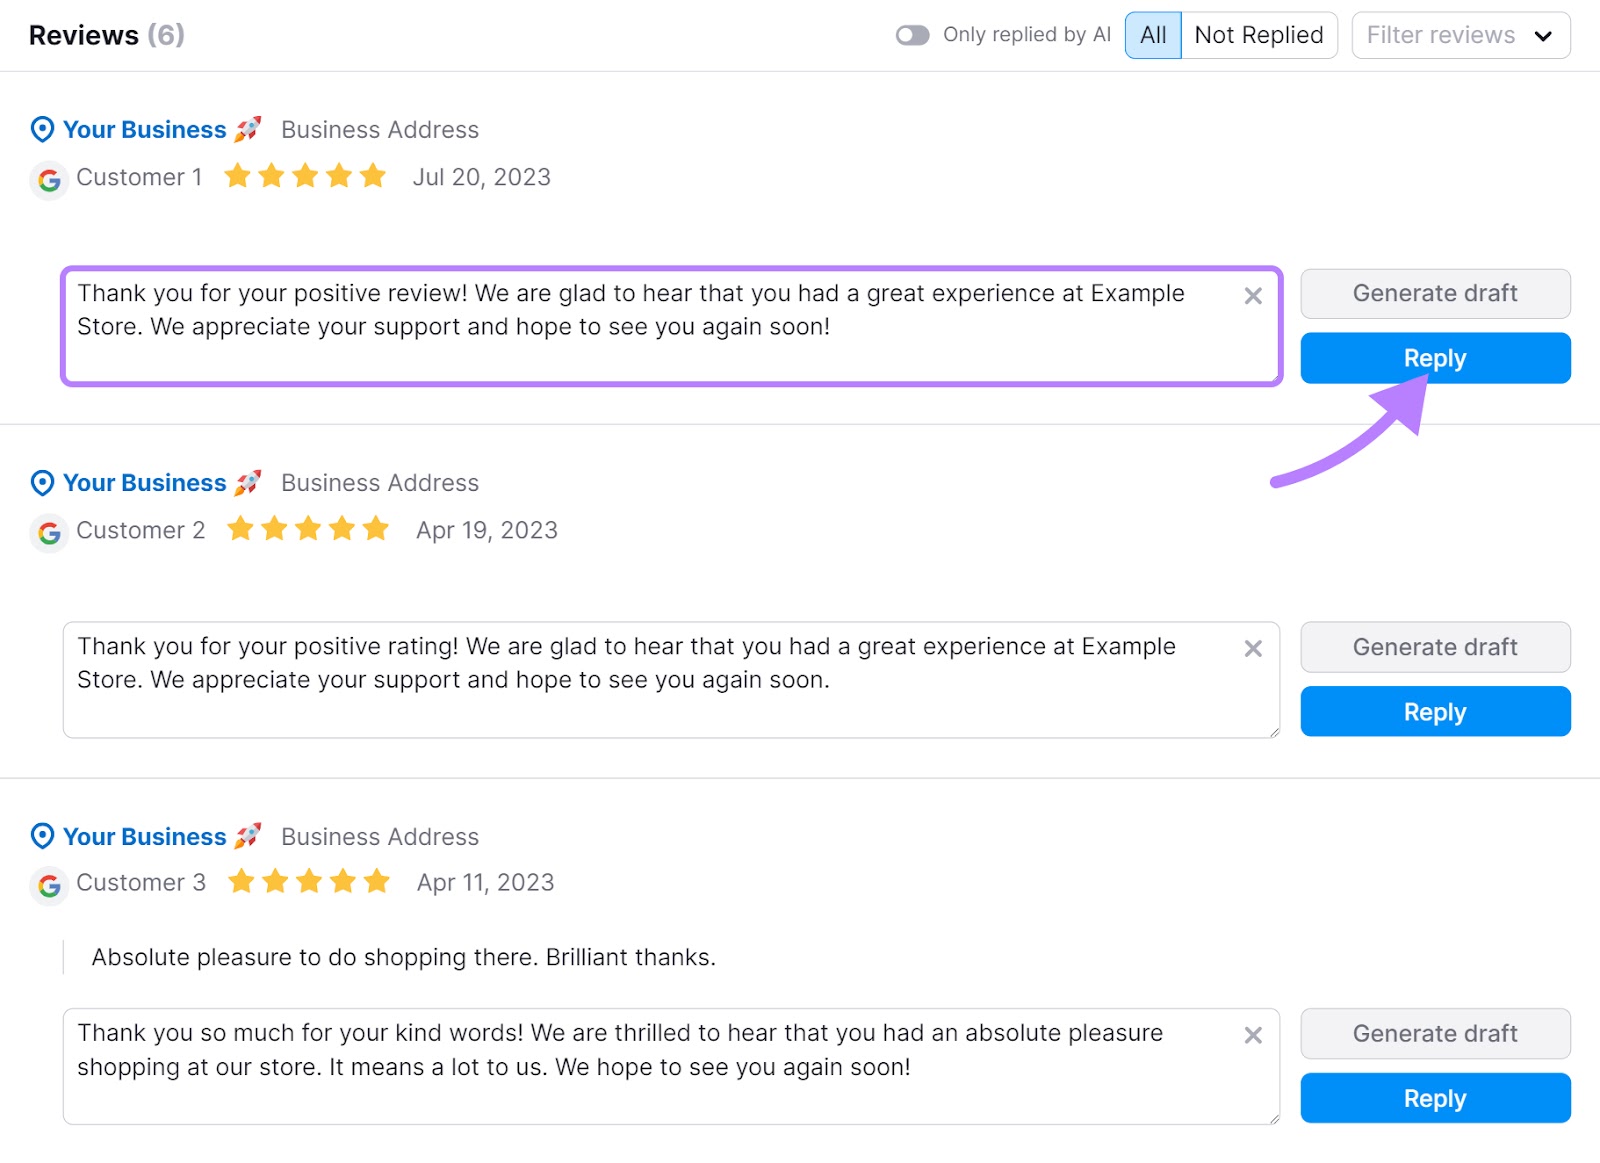 "Reviews" page in Semrush’s Review Management tool